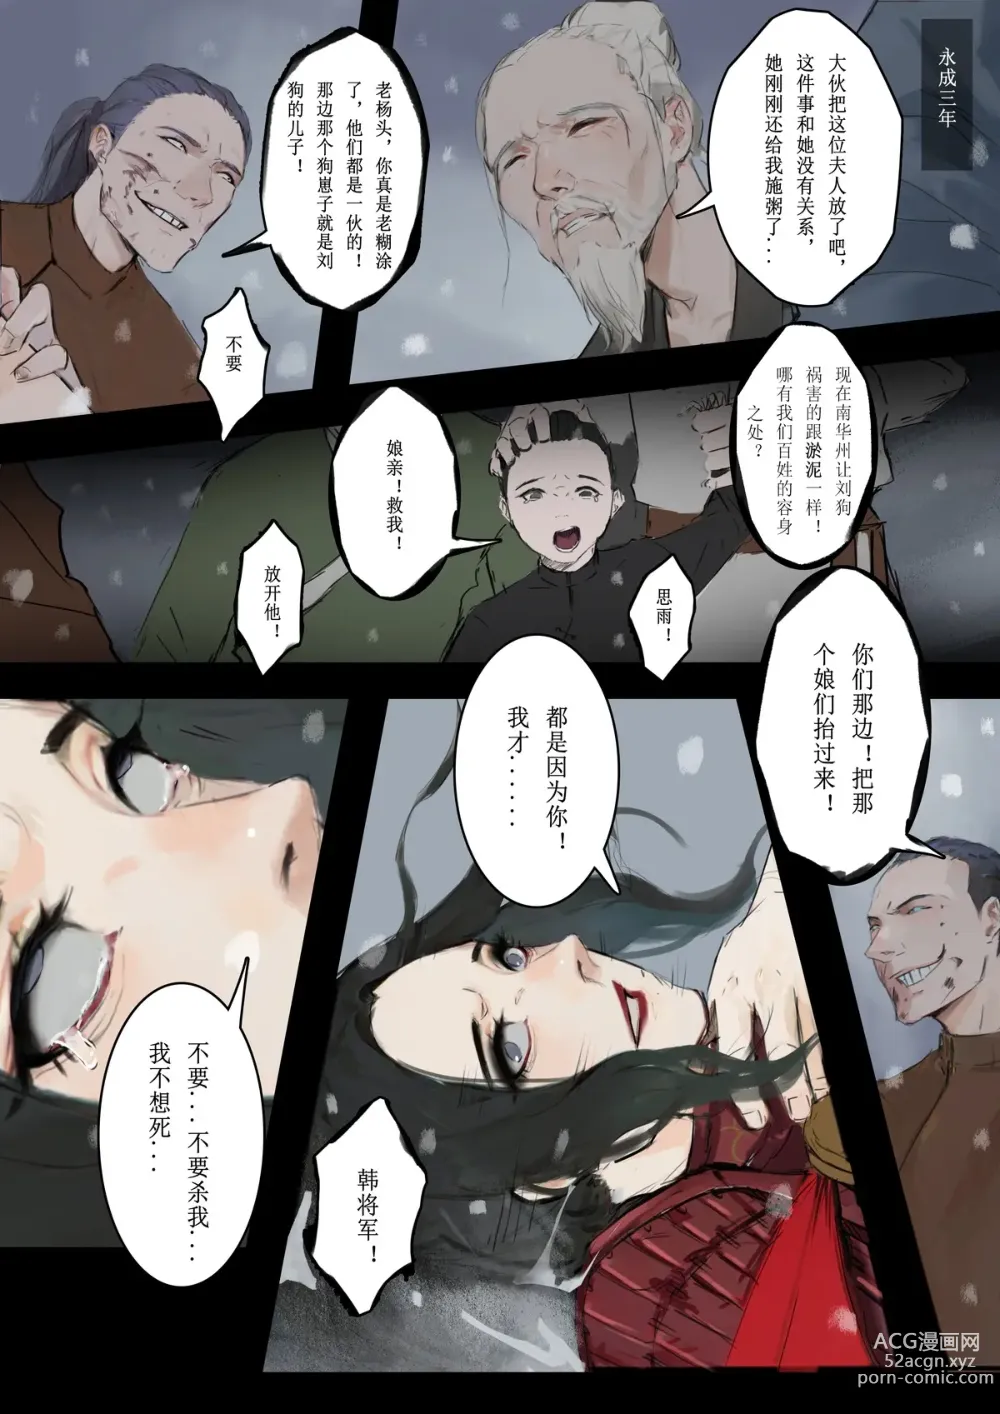 Page 14 of doujinshi 砂中莲